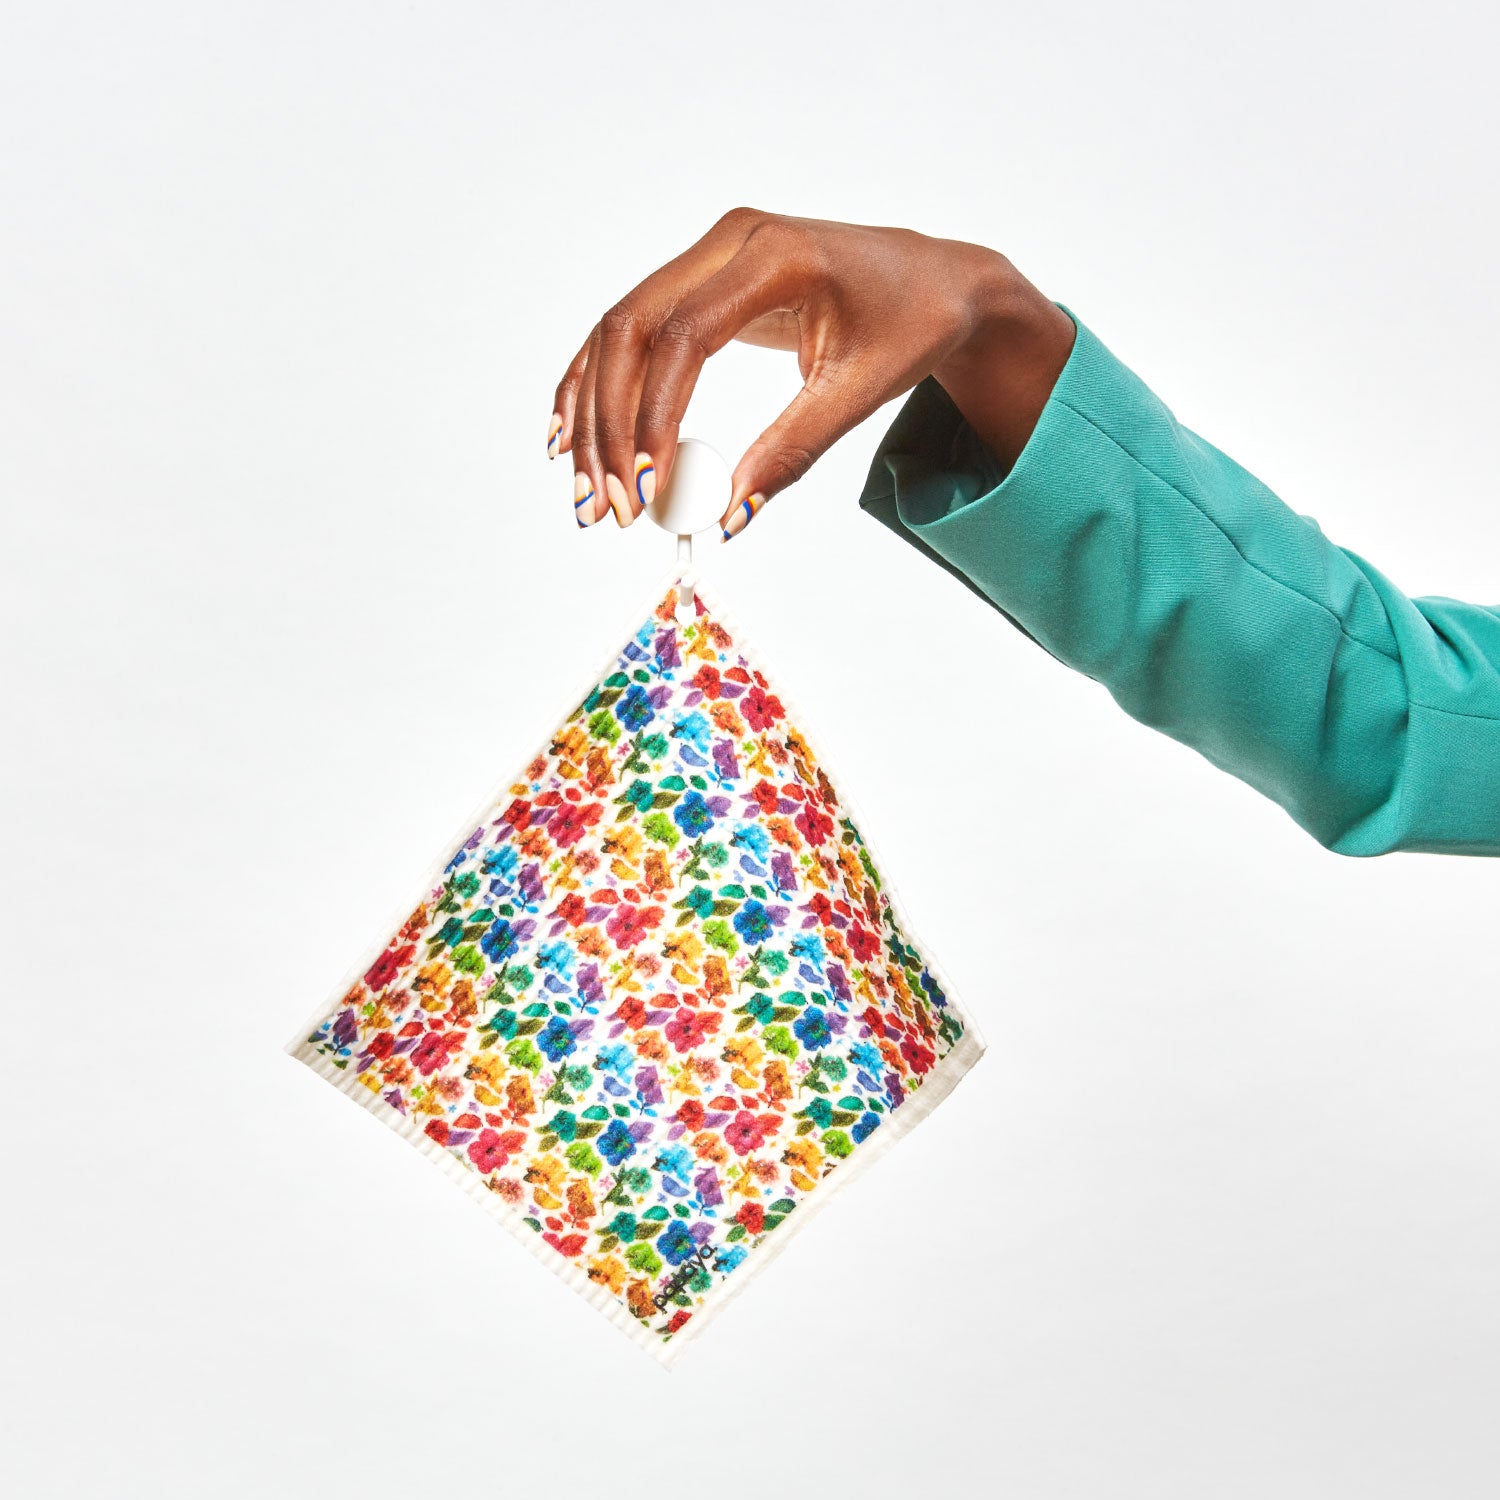 Model holding reusable paper towel hanging on a hook with colorful floral design by artist Ramzy Masri